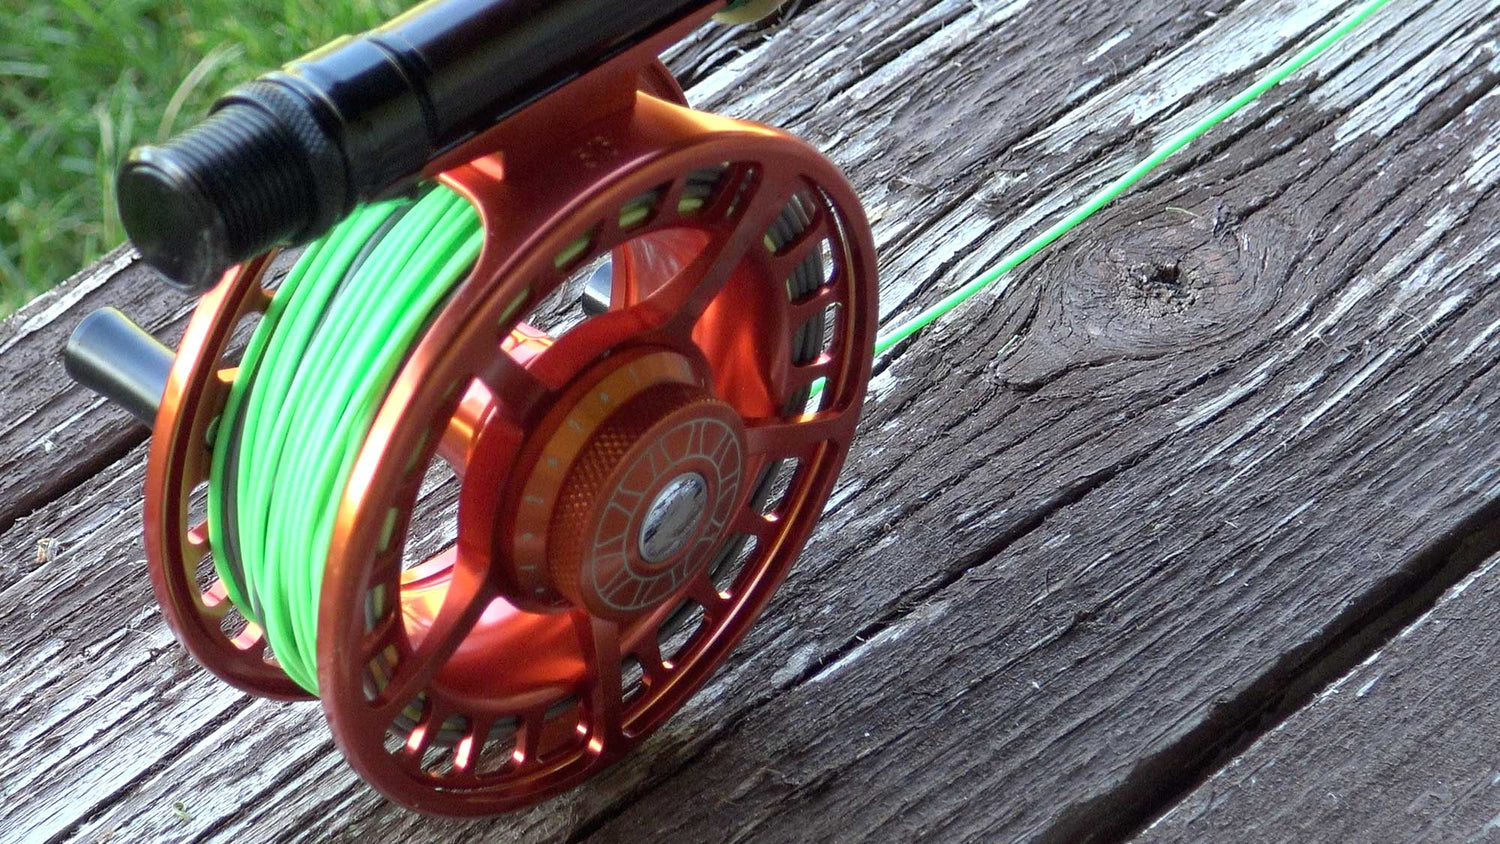 Buy Fly Reel Fishing Online Shopping at